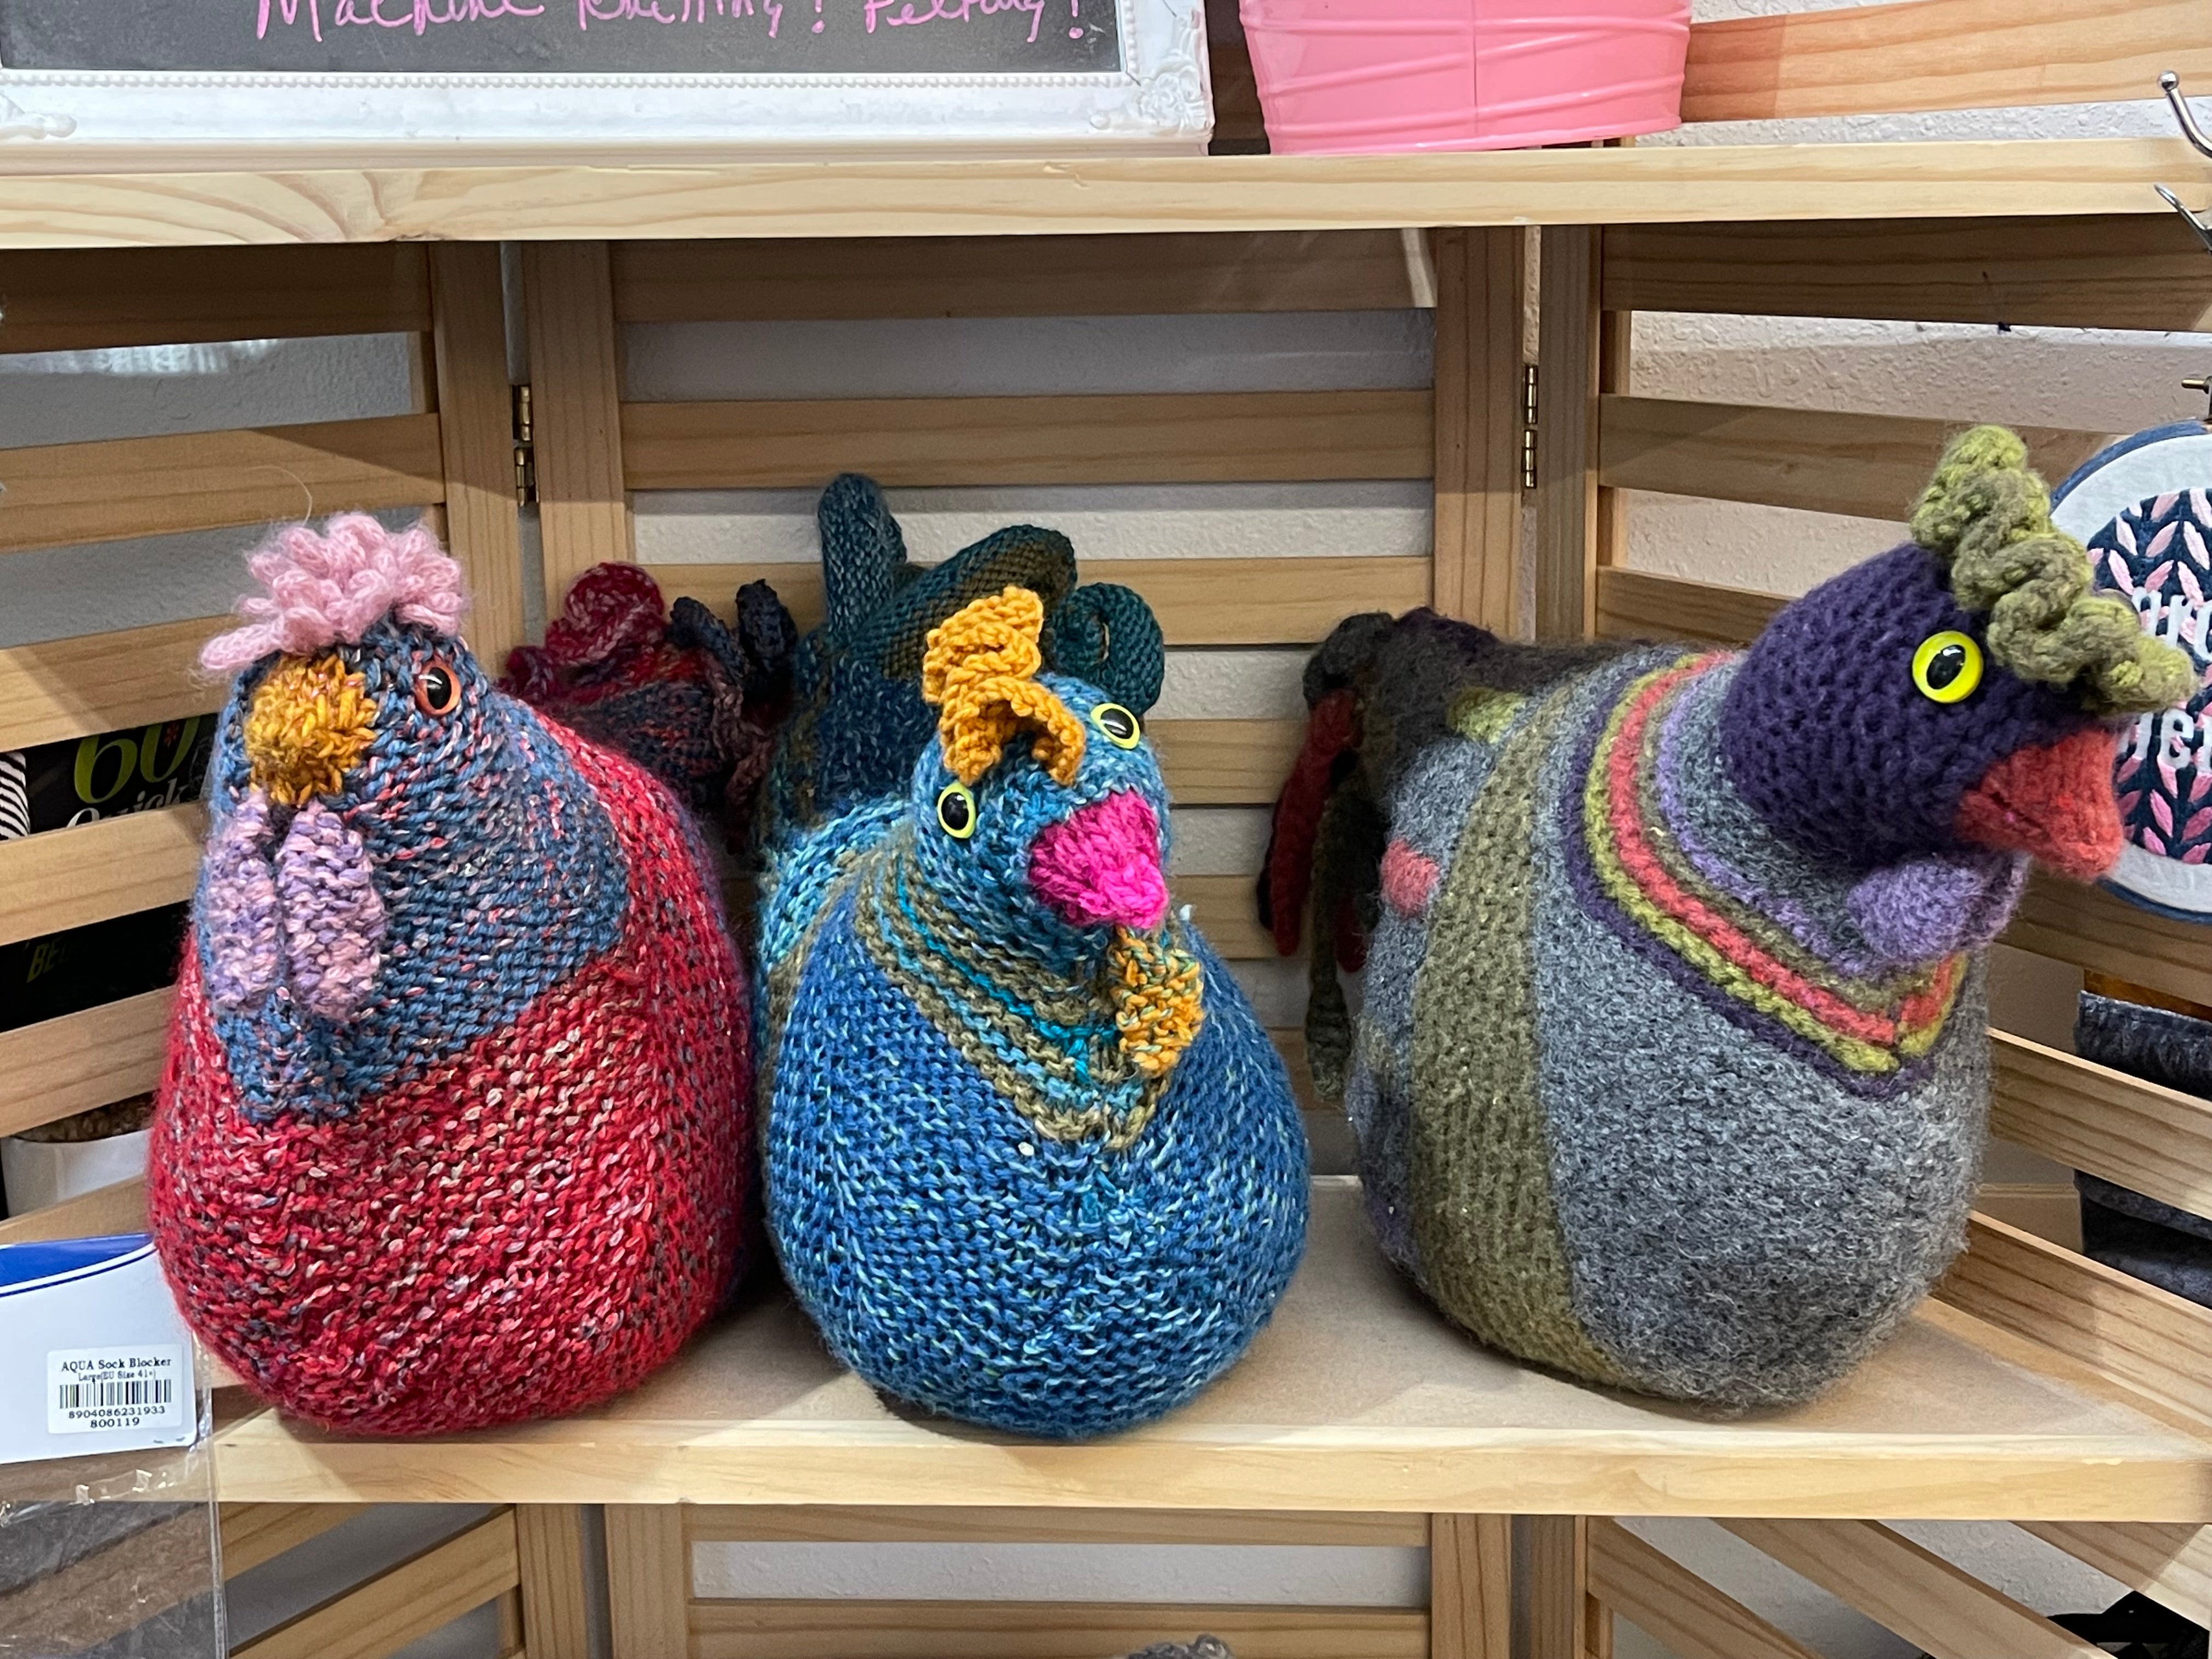 Emotional Support Chicks Crochet Knitted Chickens 